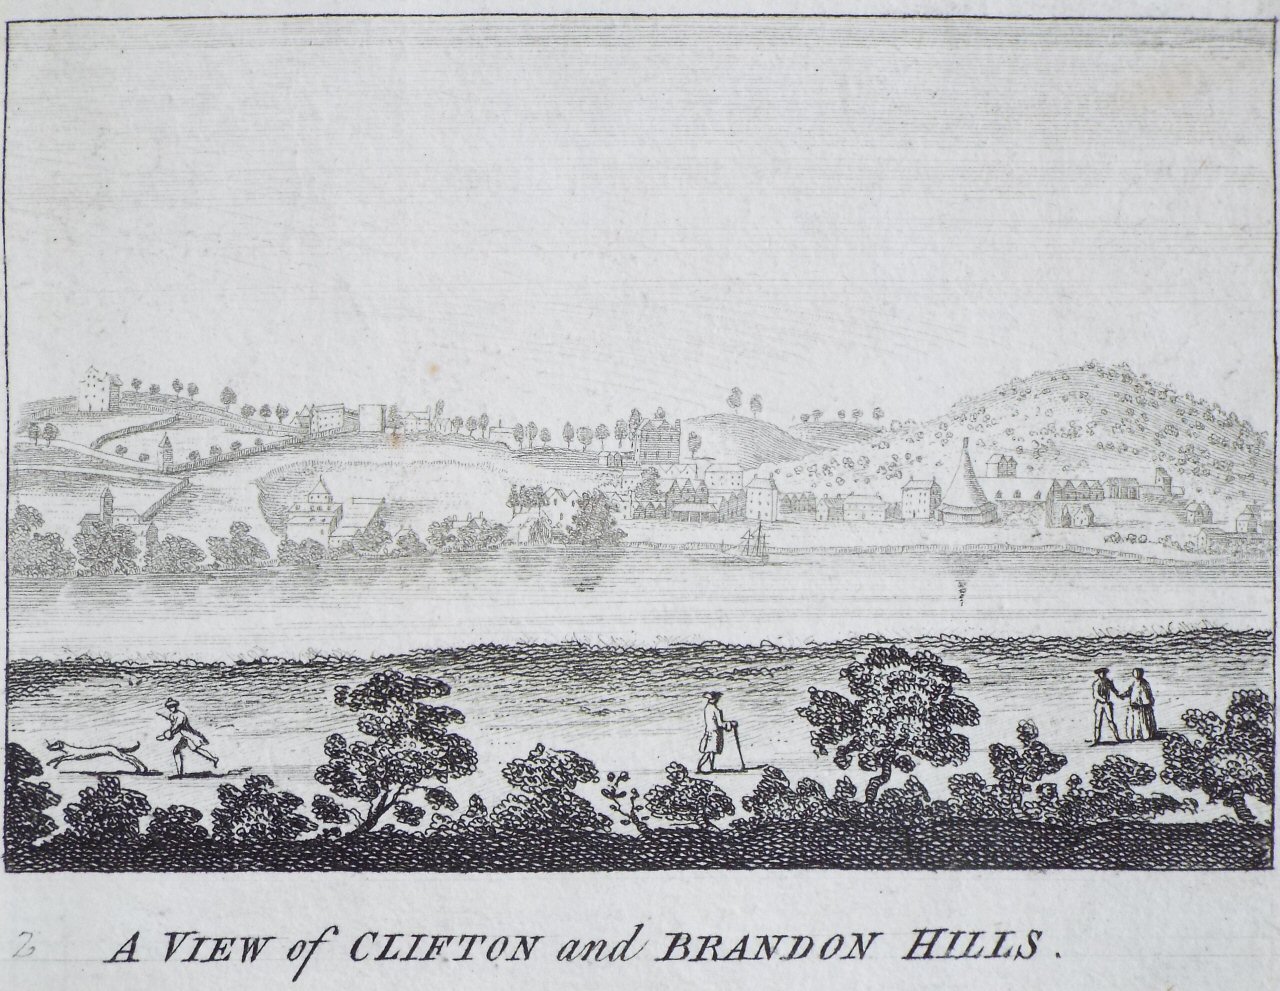 Print - A View of Clifton and Brandon Hills.